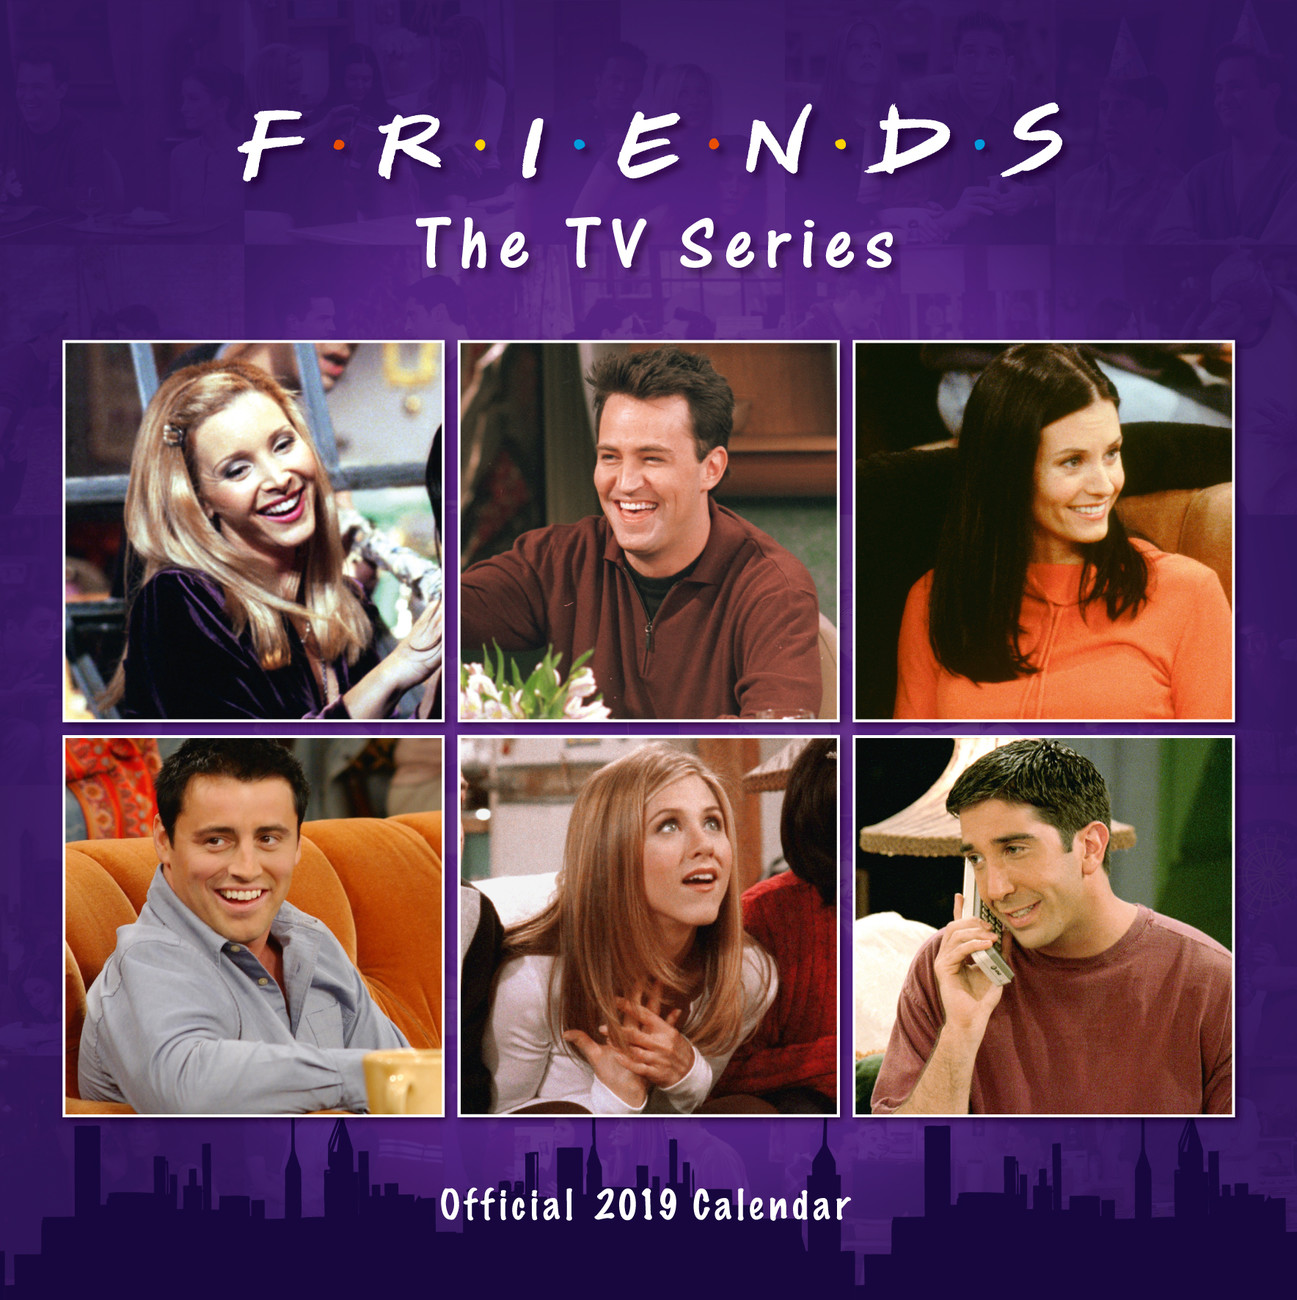 Friends Calendars 2021 on UKposters/UKposters